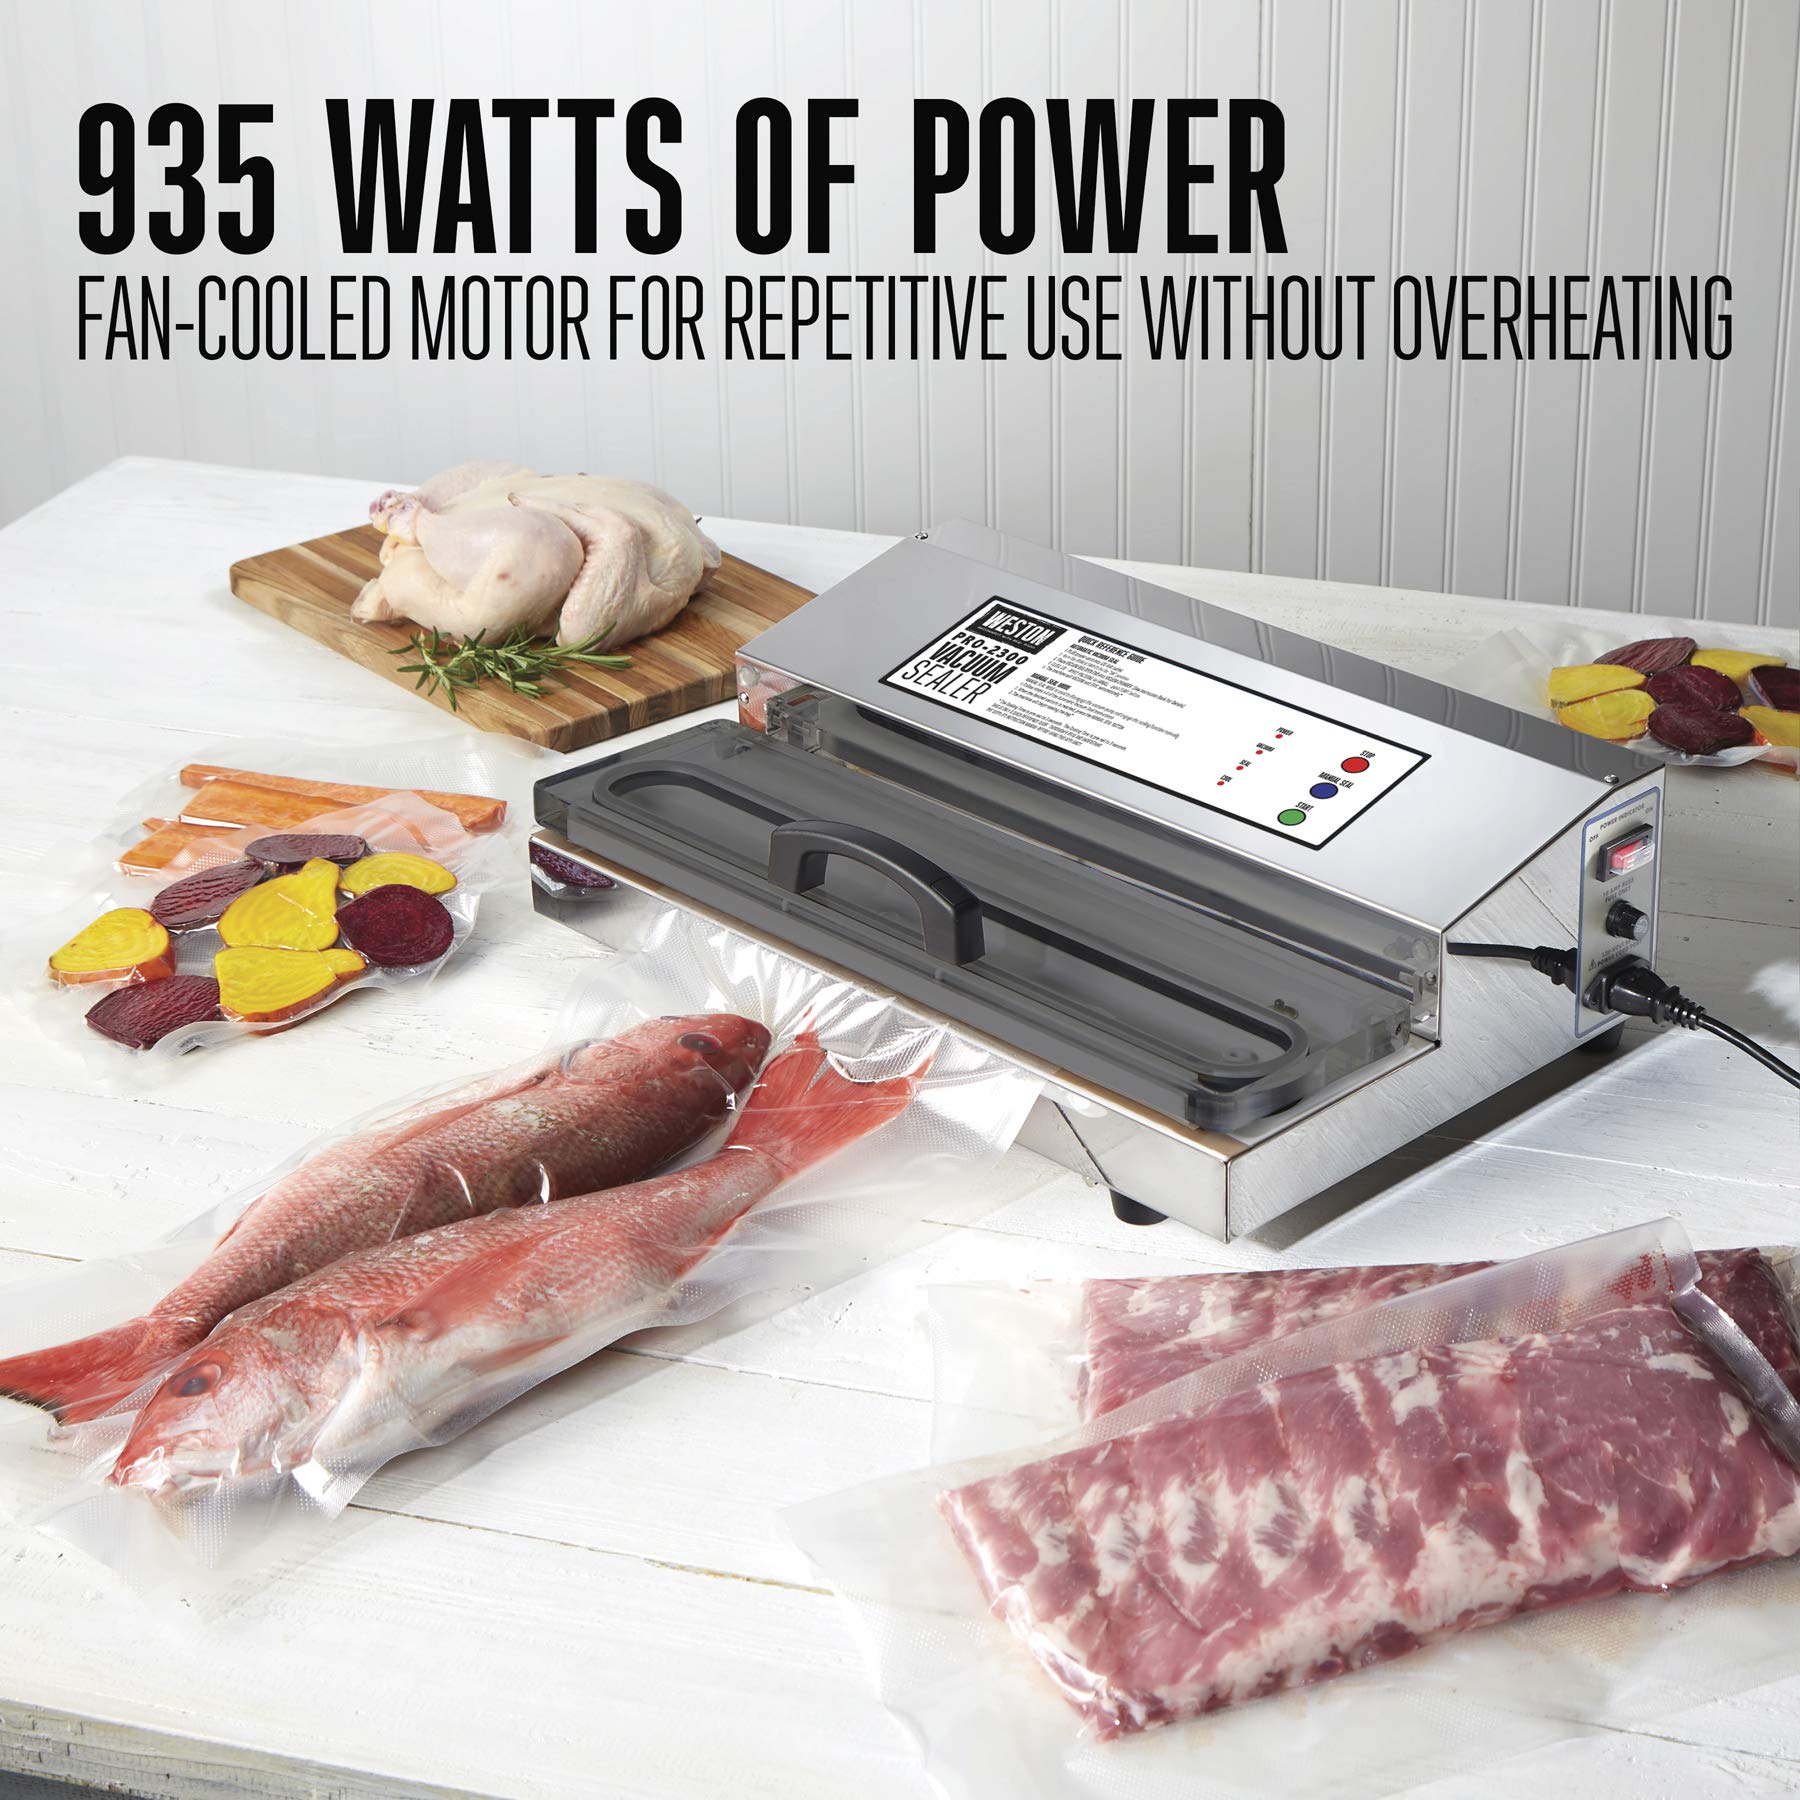 Weston Brands Vacuum Sealer Machine for Food Preservation & Sous Vide, Extra-Wide Bar, Sealing Bags up to 16